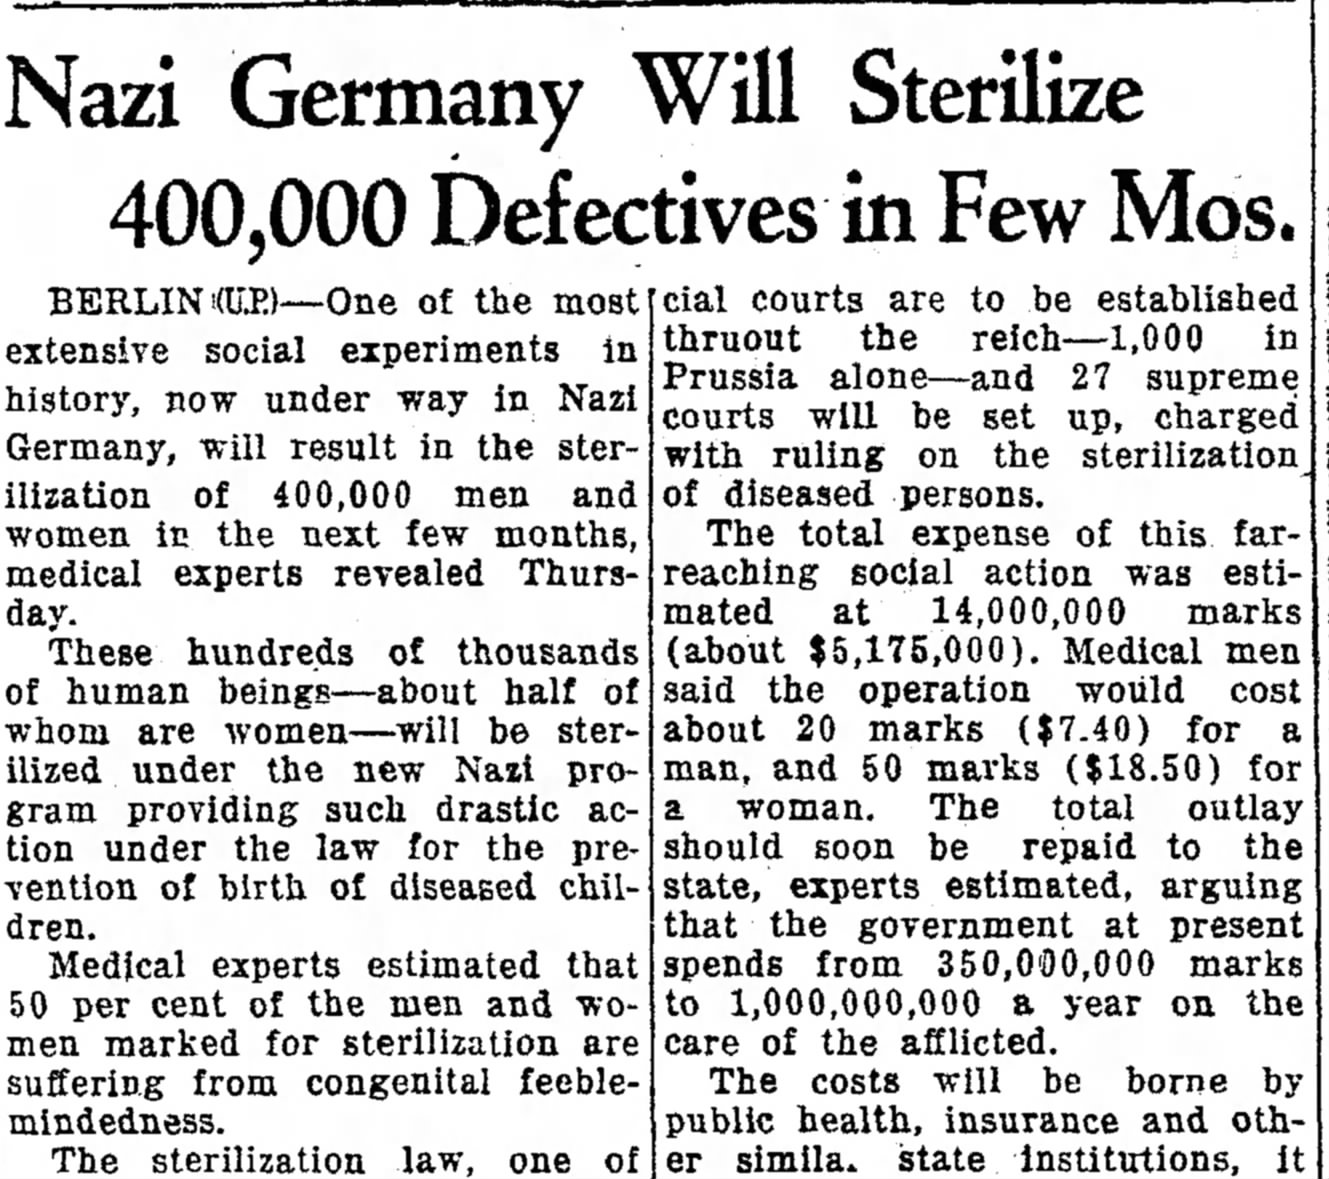 Nazi Germany Will Sterilize 400,000 Defectives in Few Mos.